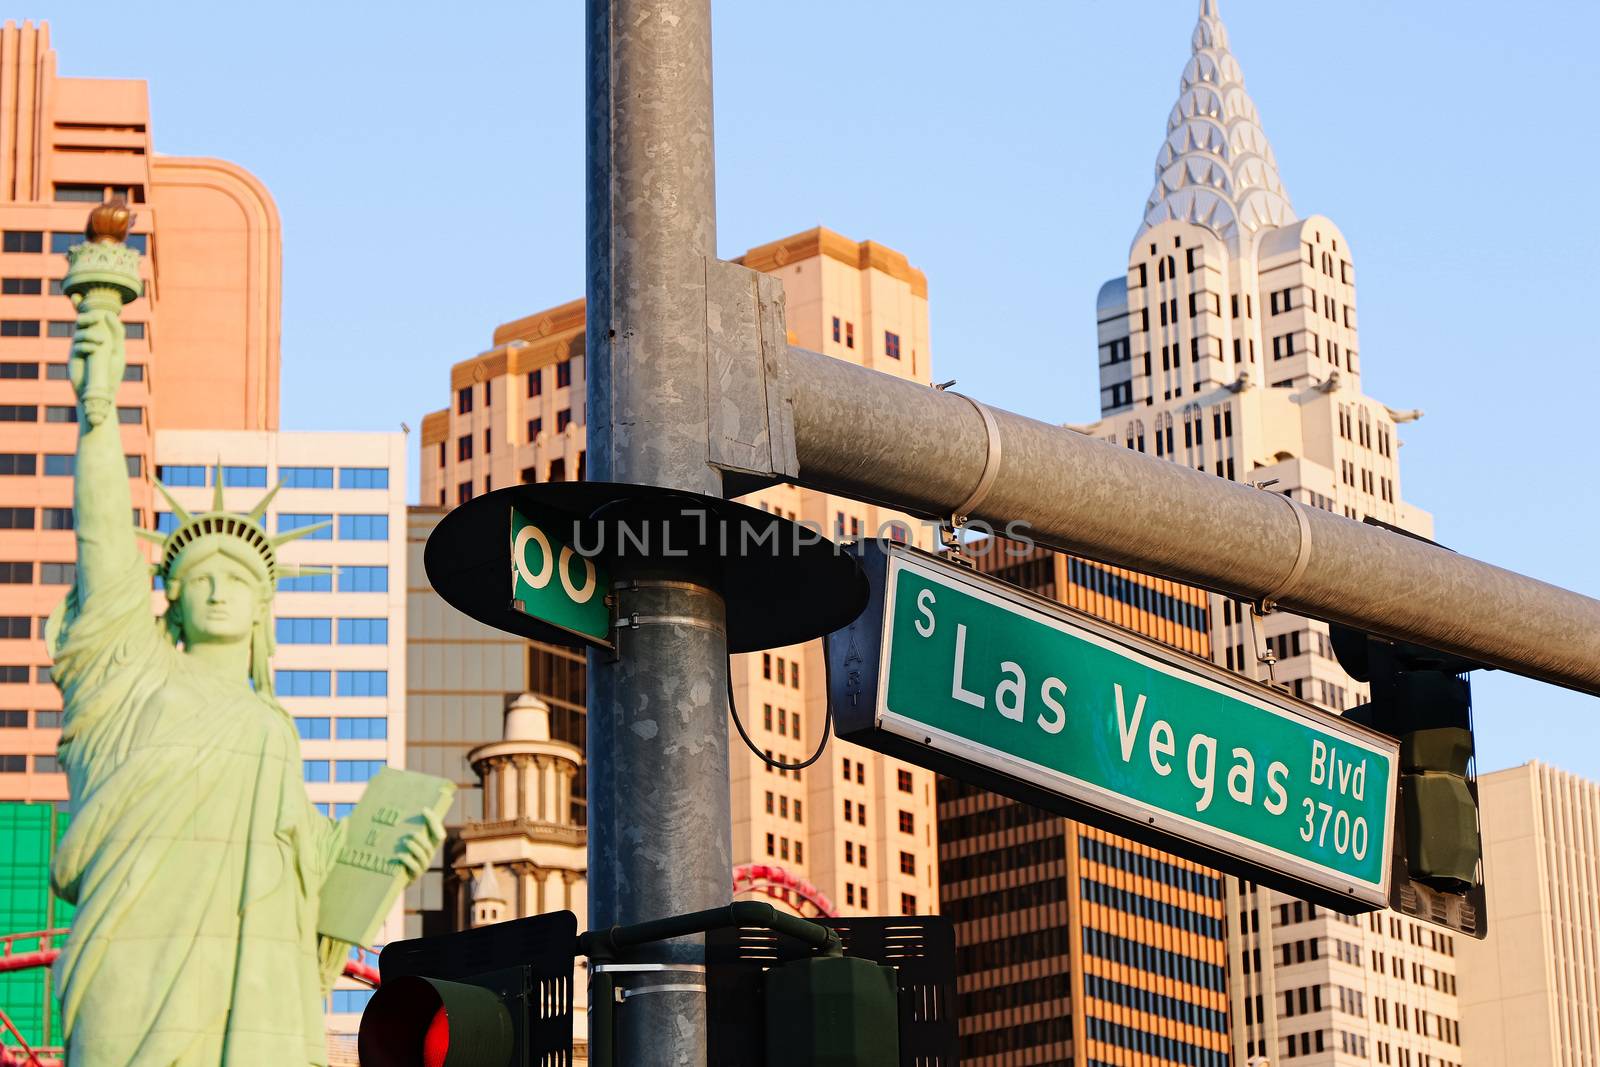 Road sign of Las Vegas BLVD.Street sign of Las vegas Boulevard.Green Las Vegas Sign with Hotel in Background. by USA-TARO